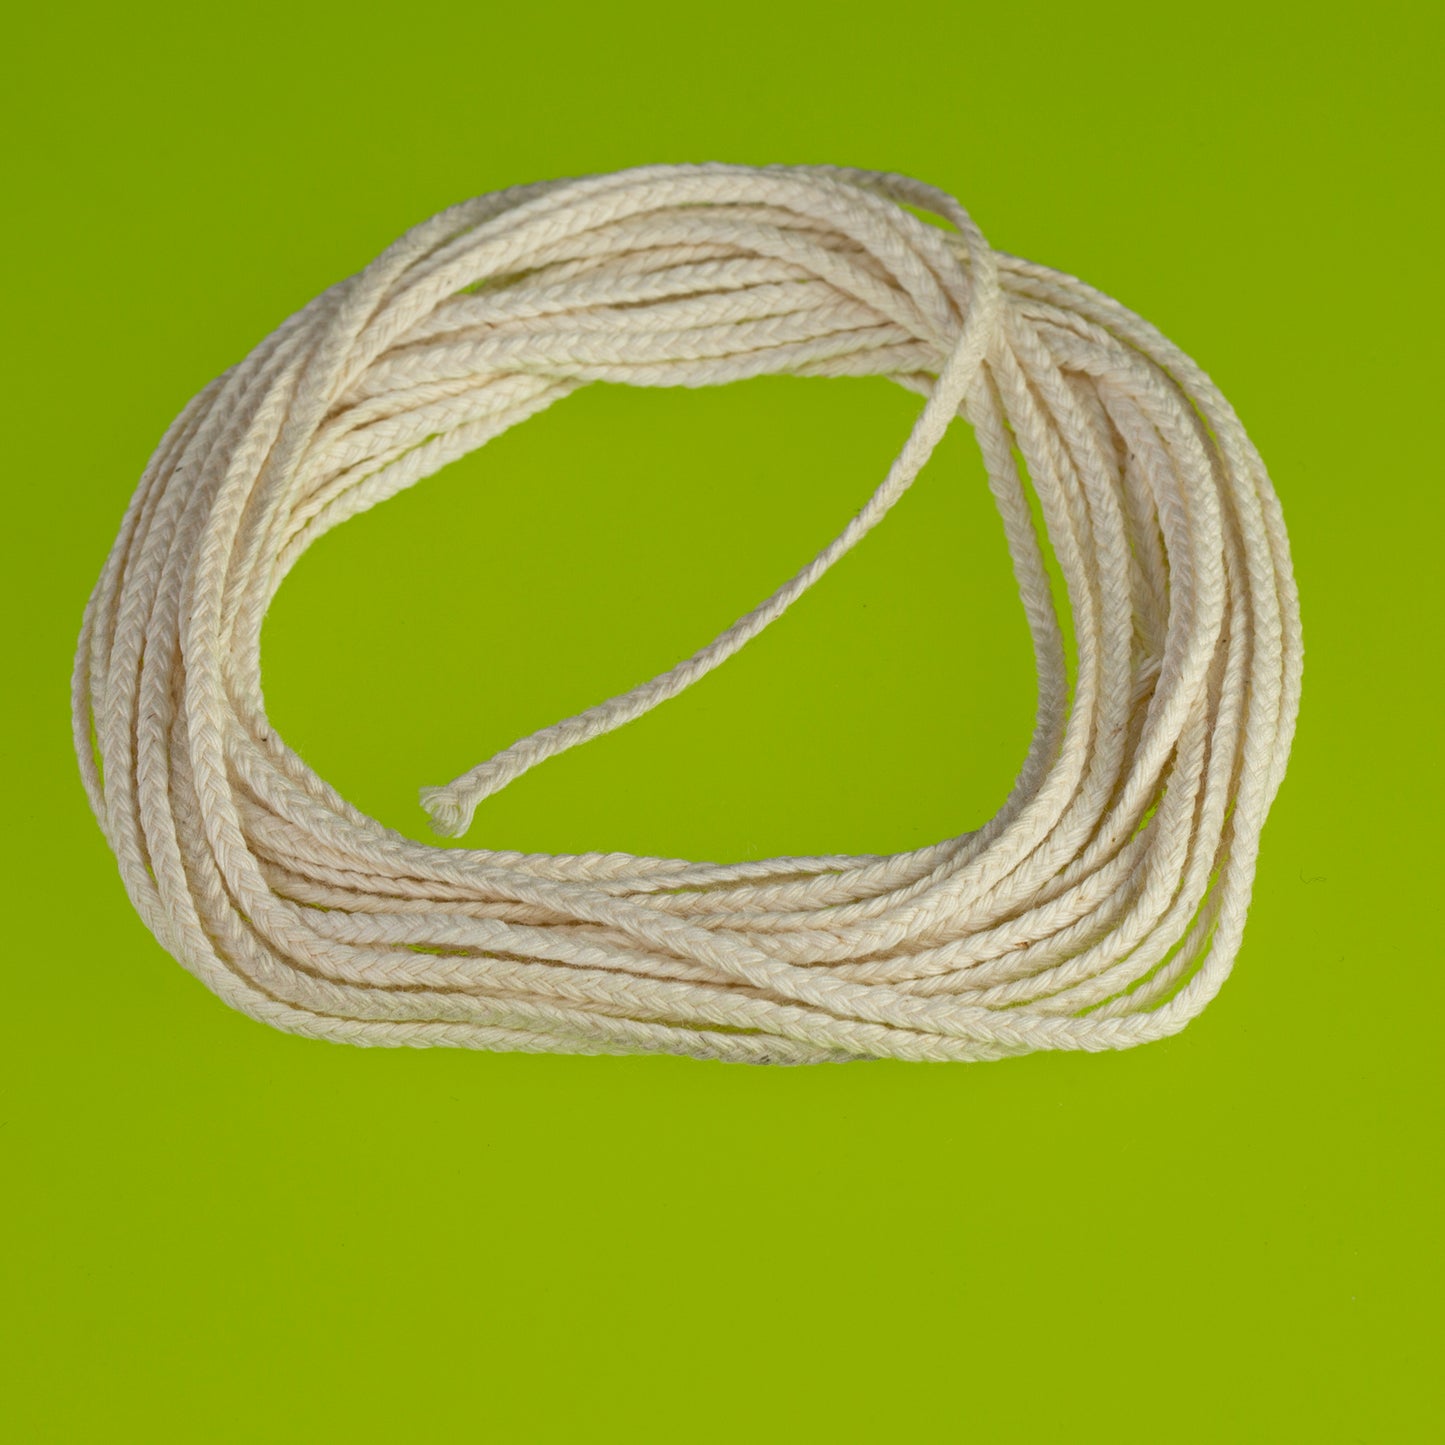 24 Ply Flat Braid Candle Wick